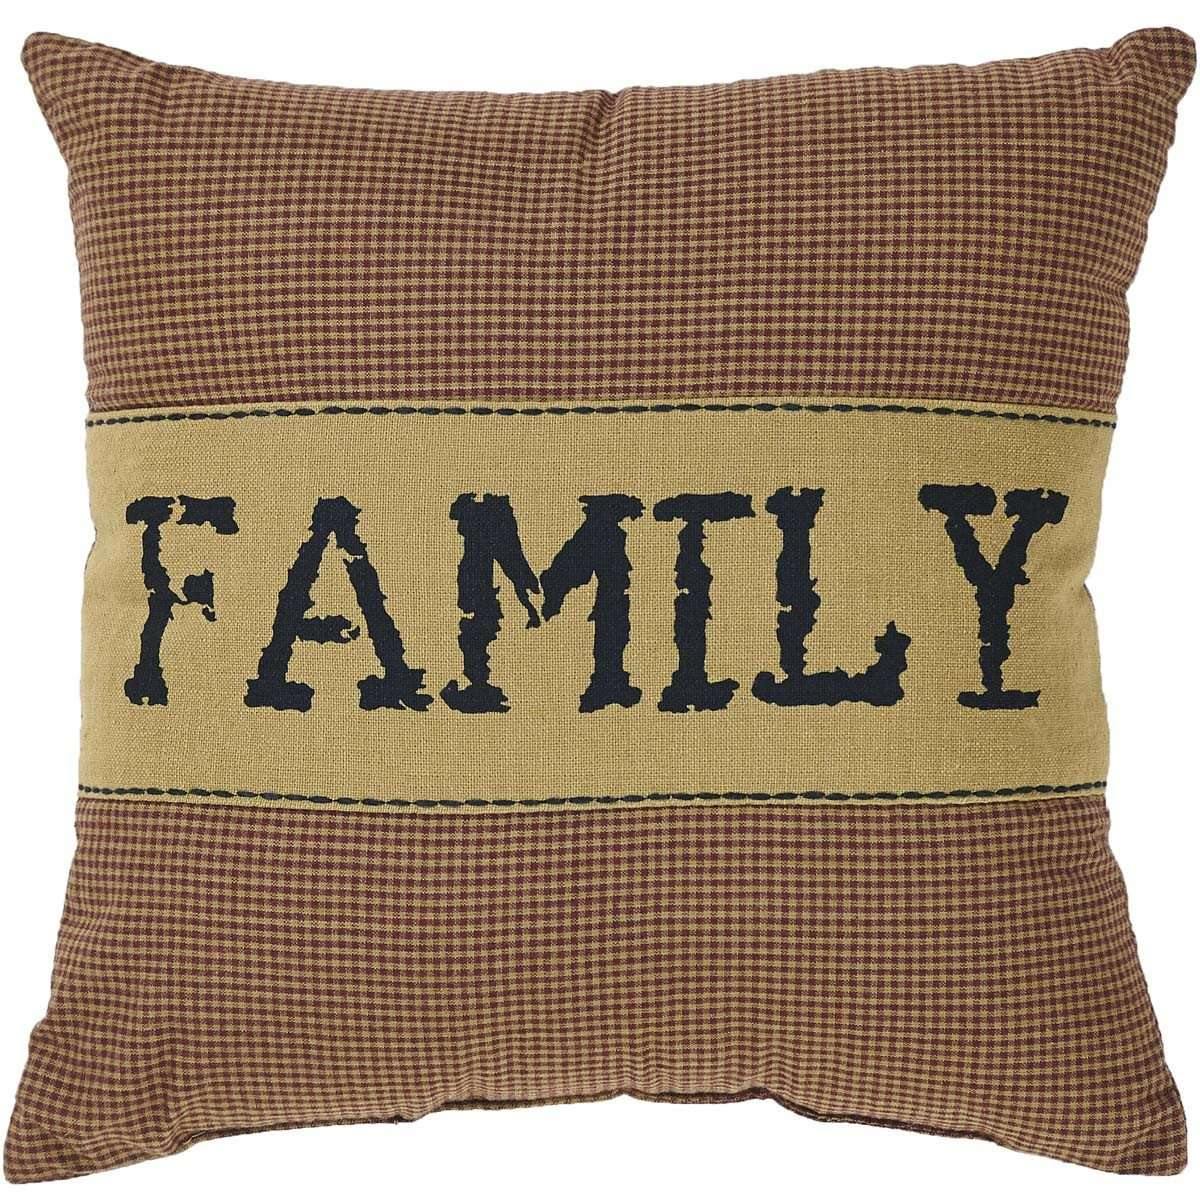 Heritage Farms Family Pillow 12x12 VHC Brands front